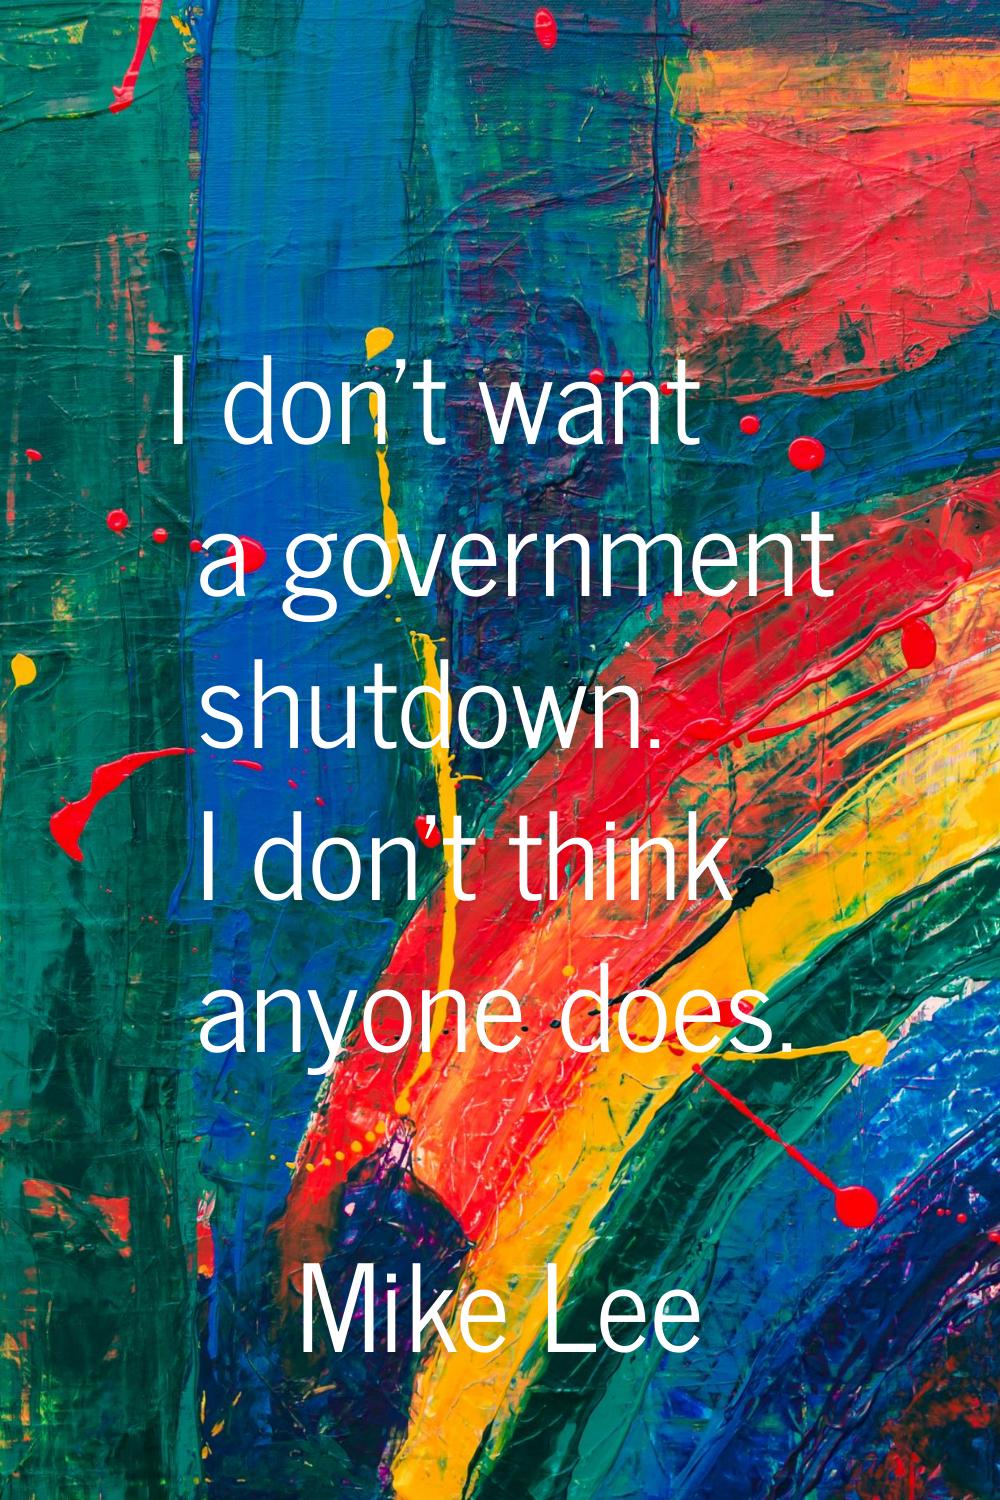 I don't want a government shutdown. I don't think anyone does.